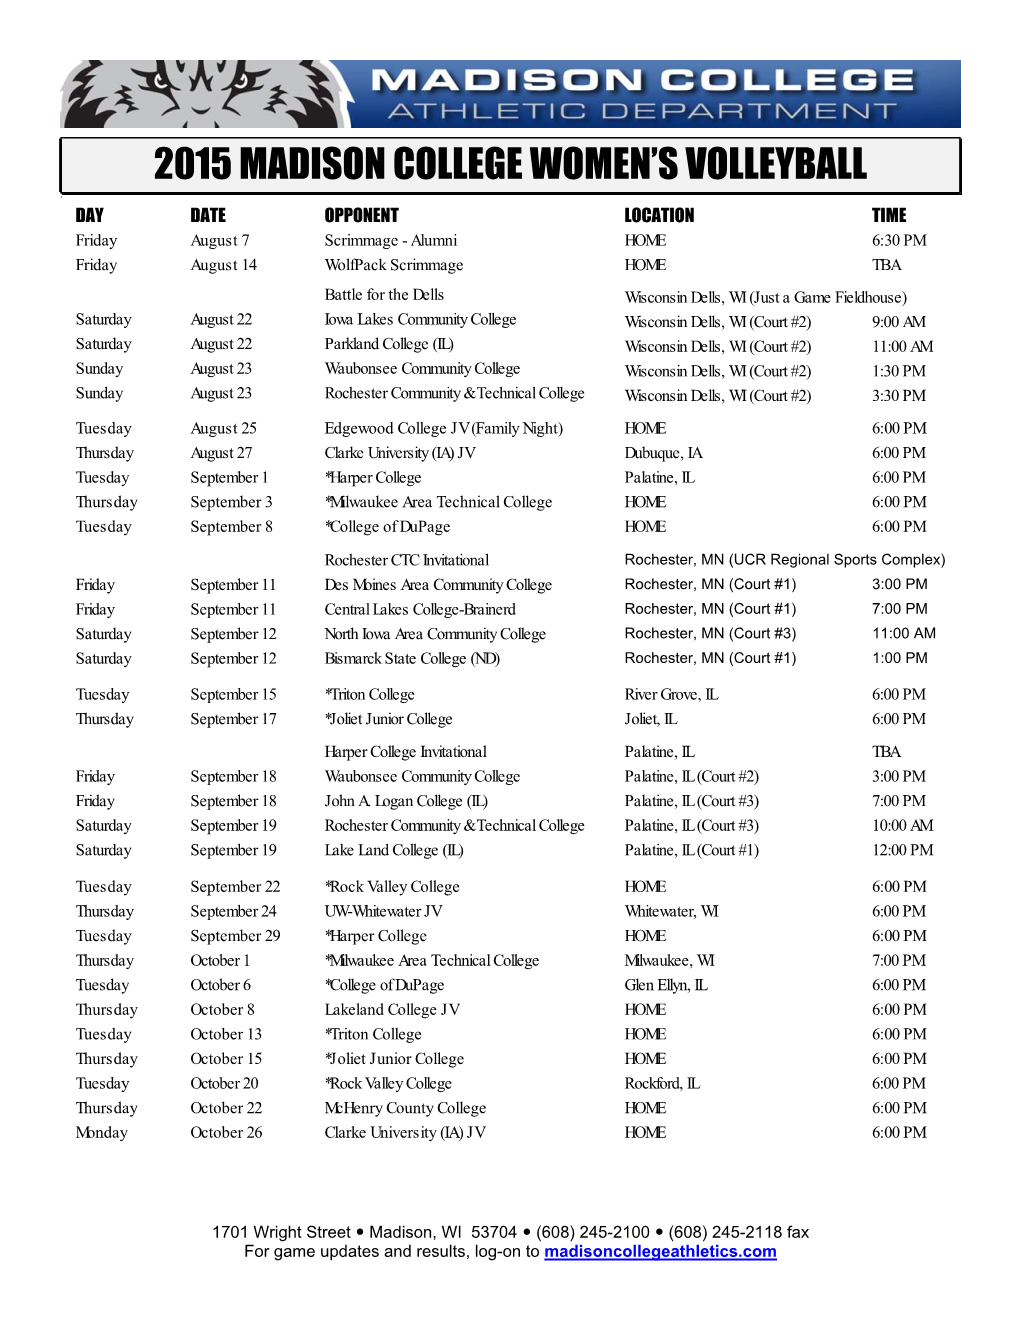 2015 Madison College Women's Volleyball